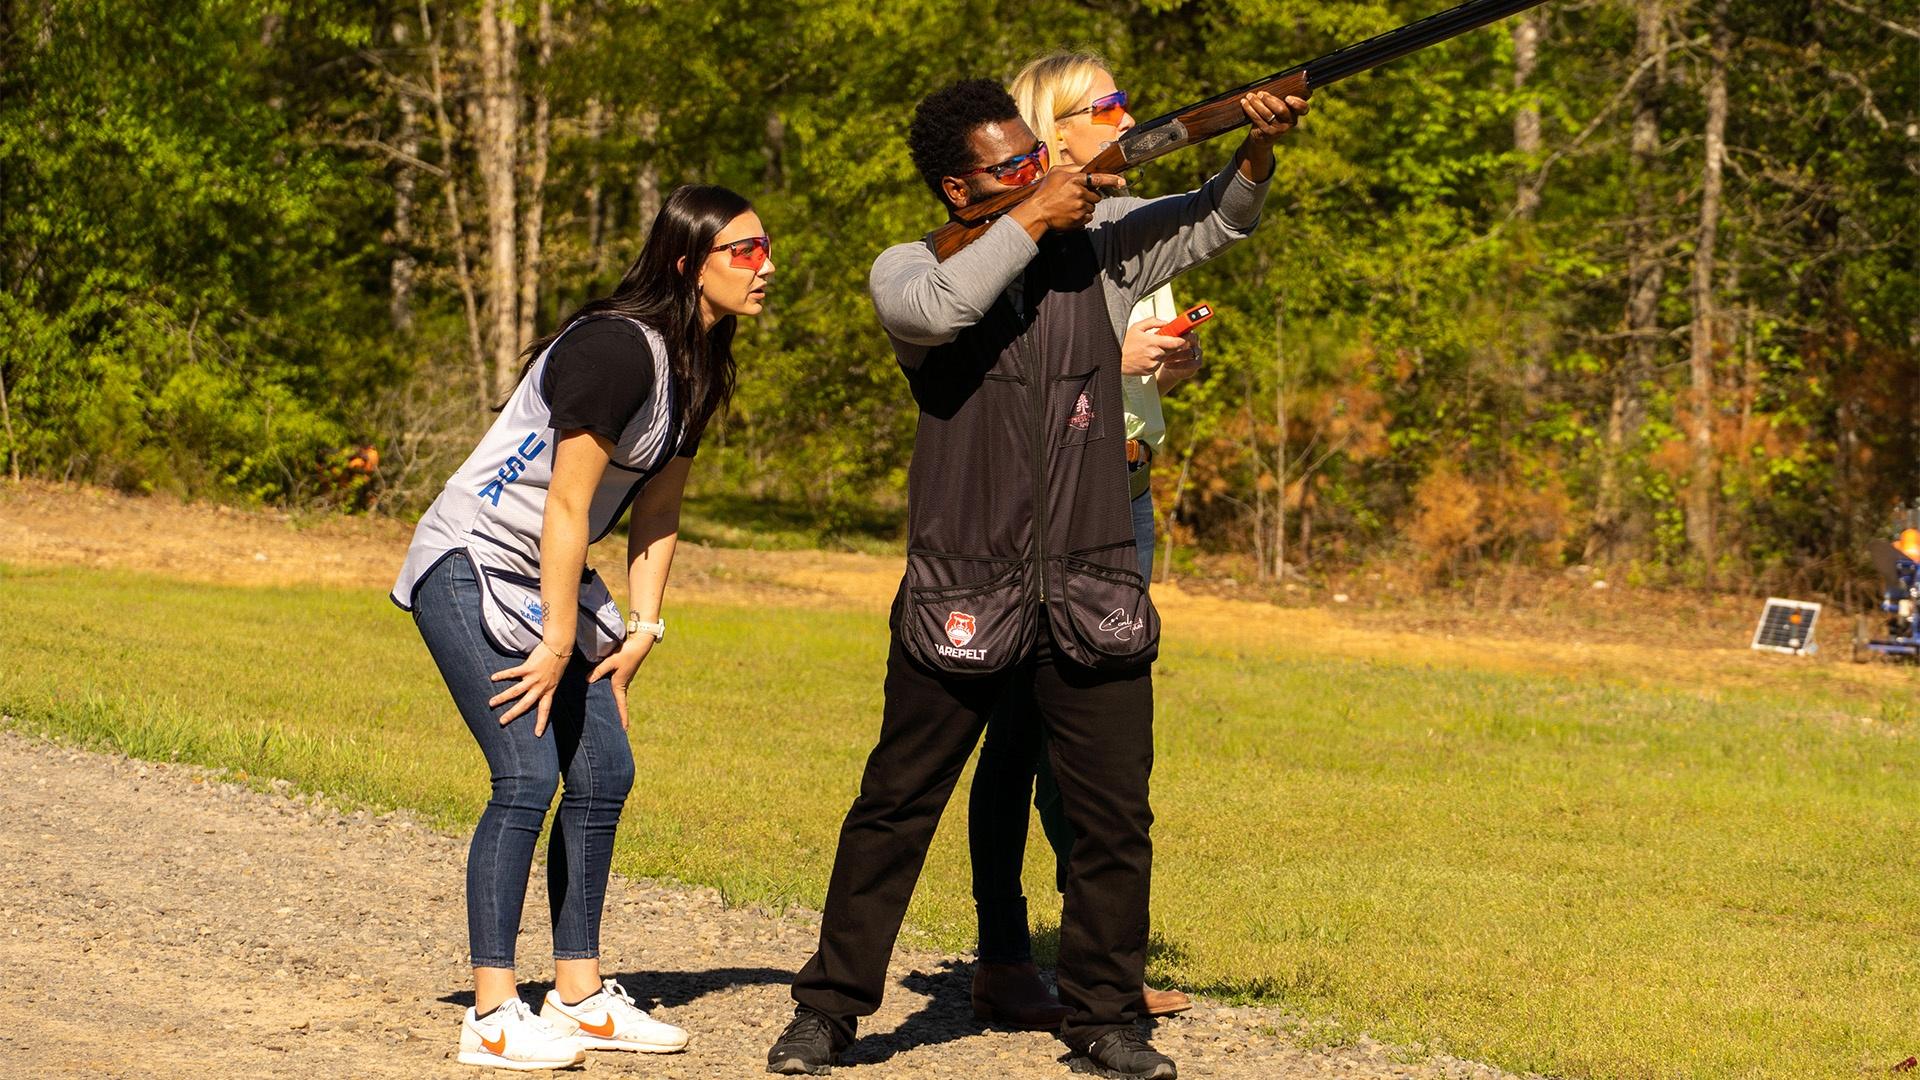 Baratunde aiming a gun with two people behind him